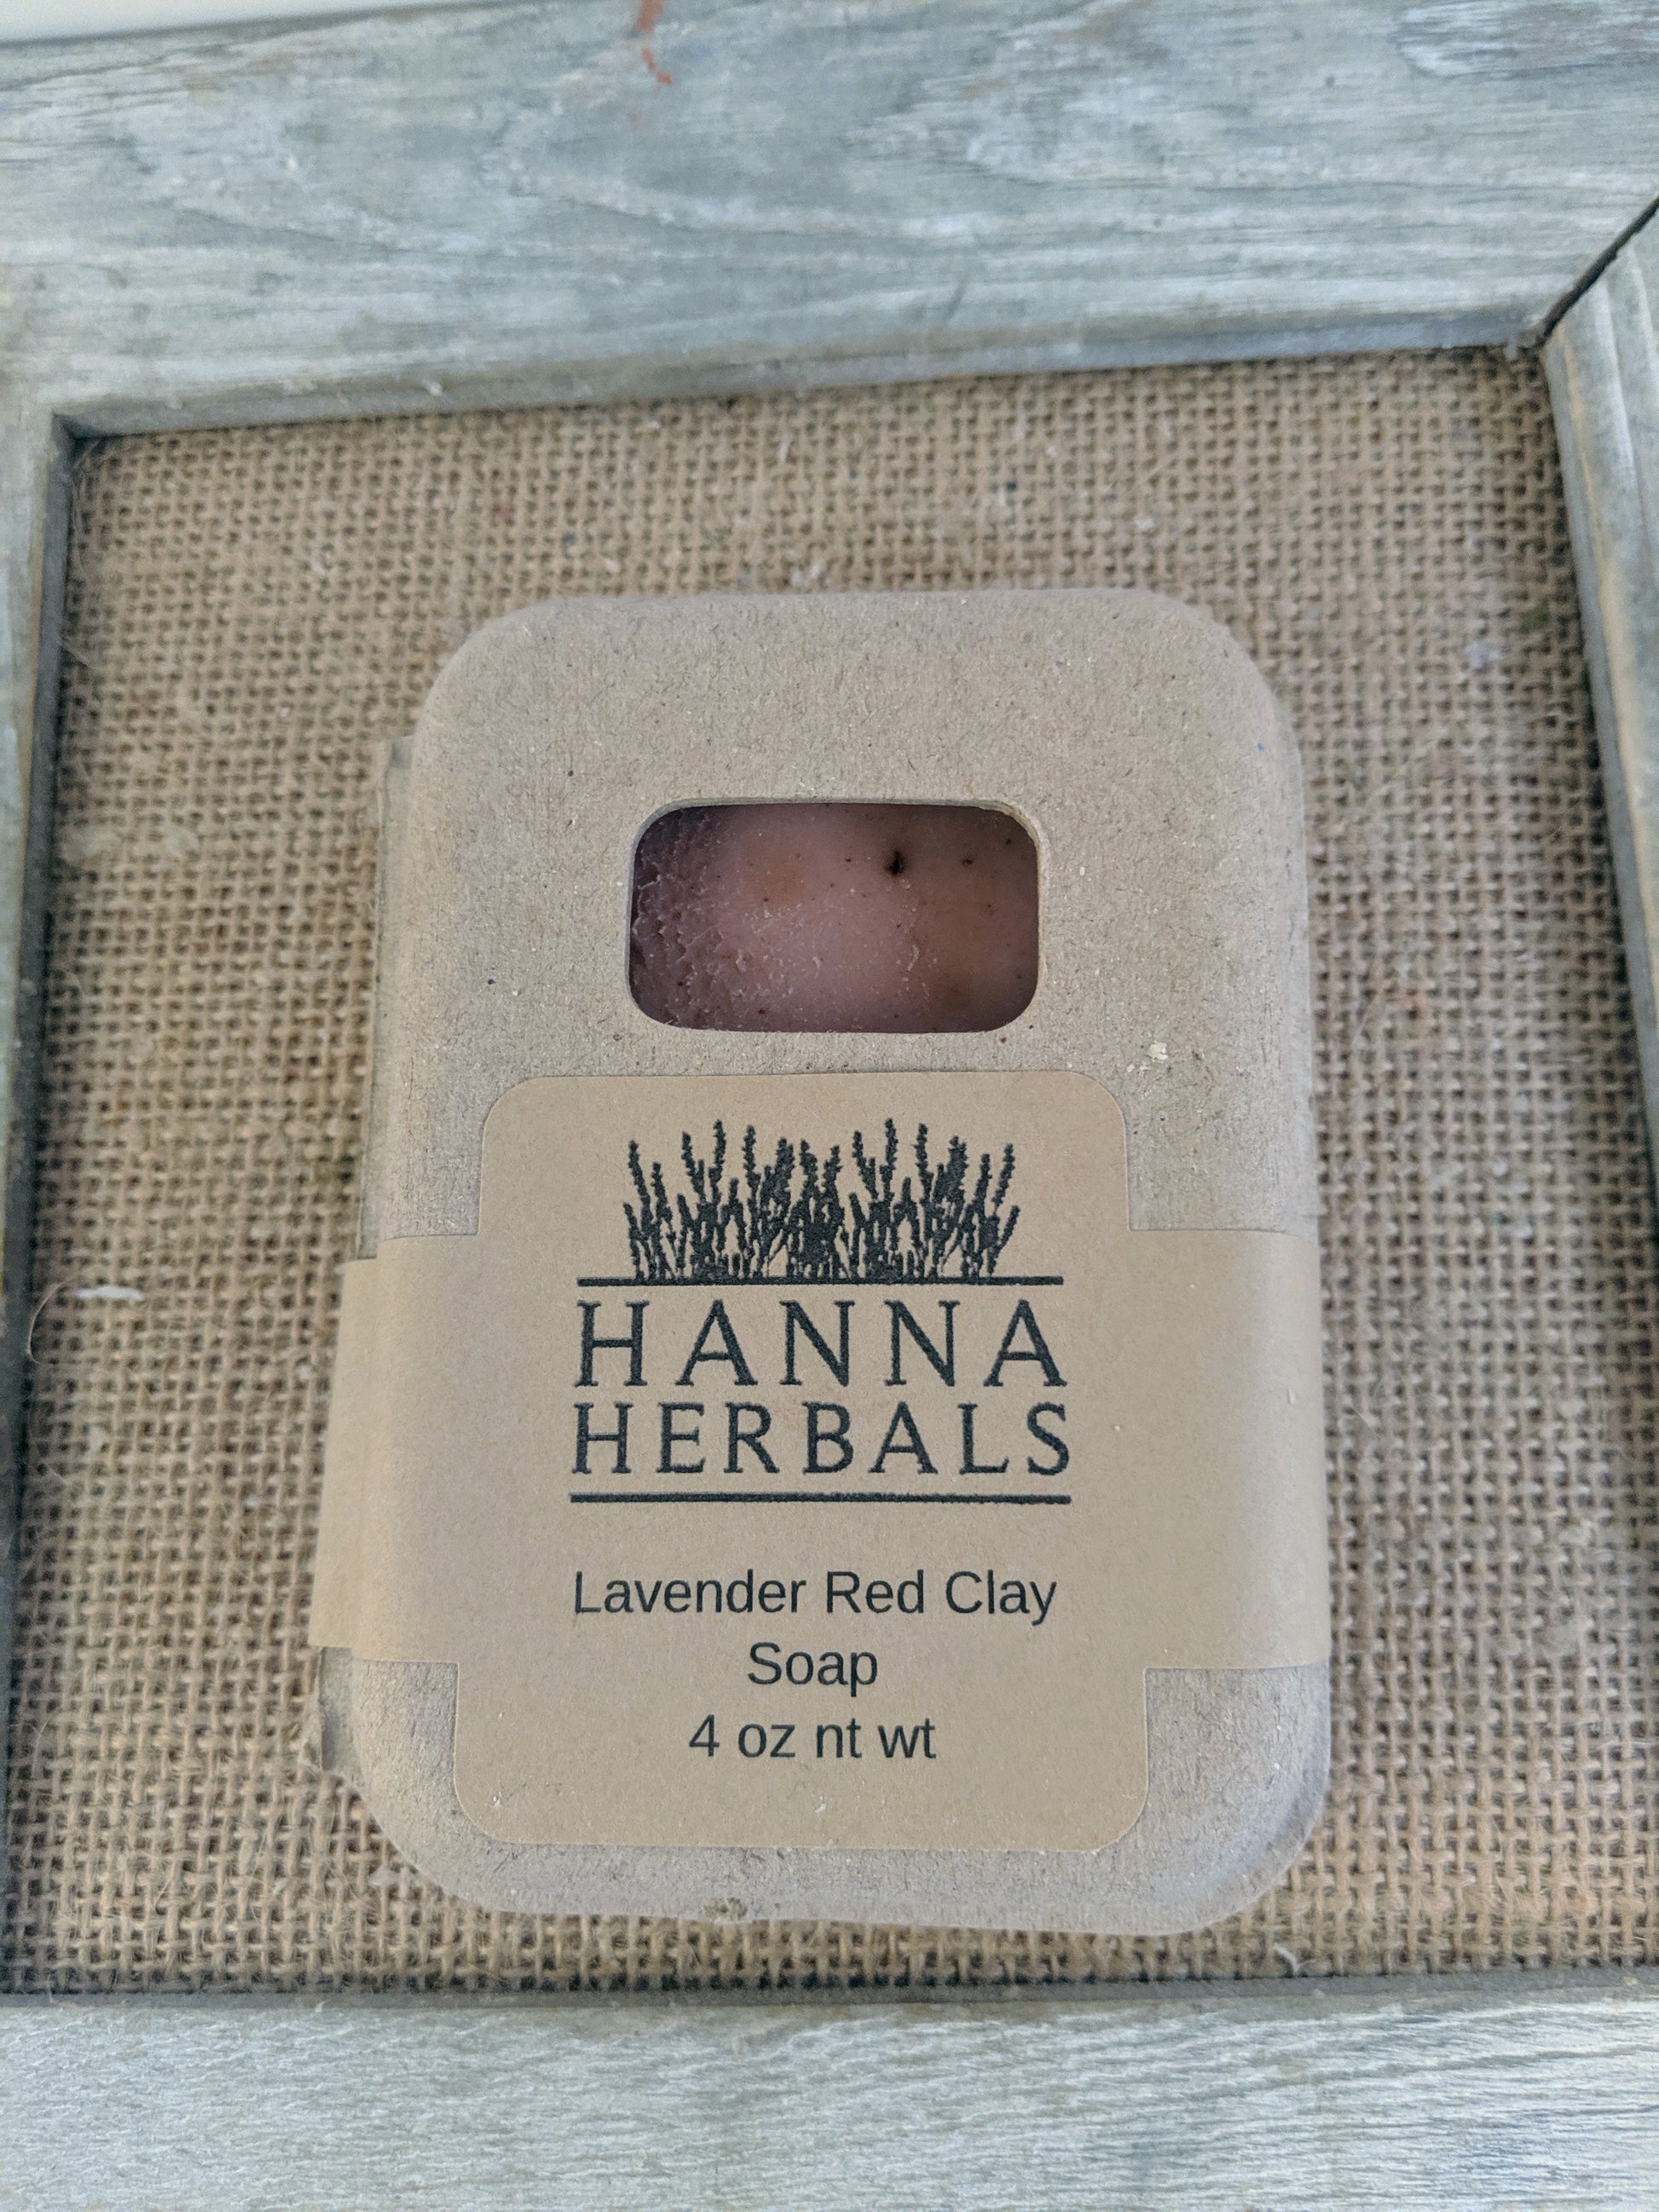 French Lavender and Red Clay Soap - Hanna Herbals